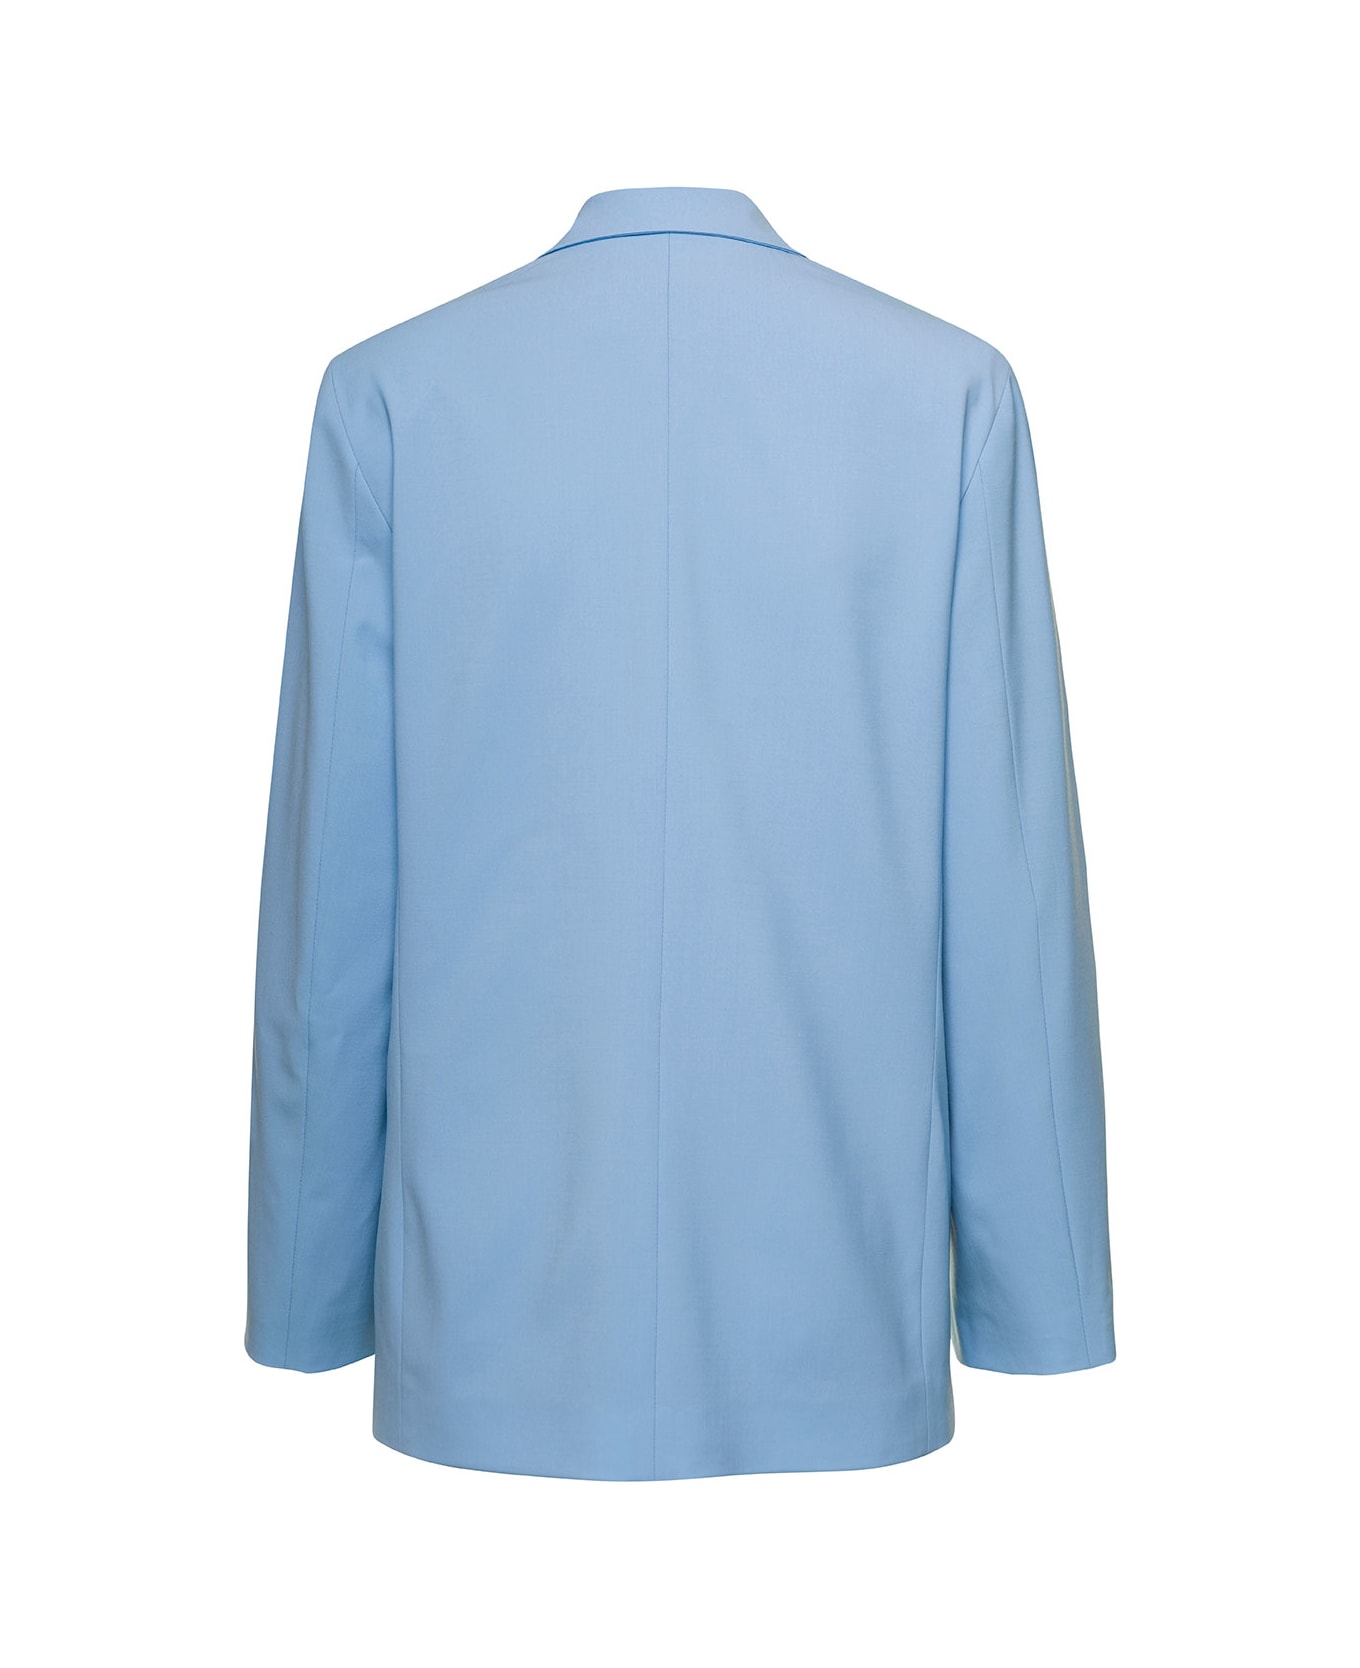 MSGM Light Blue Double-breasted Jacket With Buttoned Sleeves In Stretch Wool Woman - Blu ブレザー